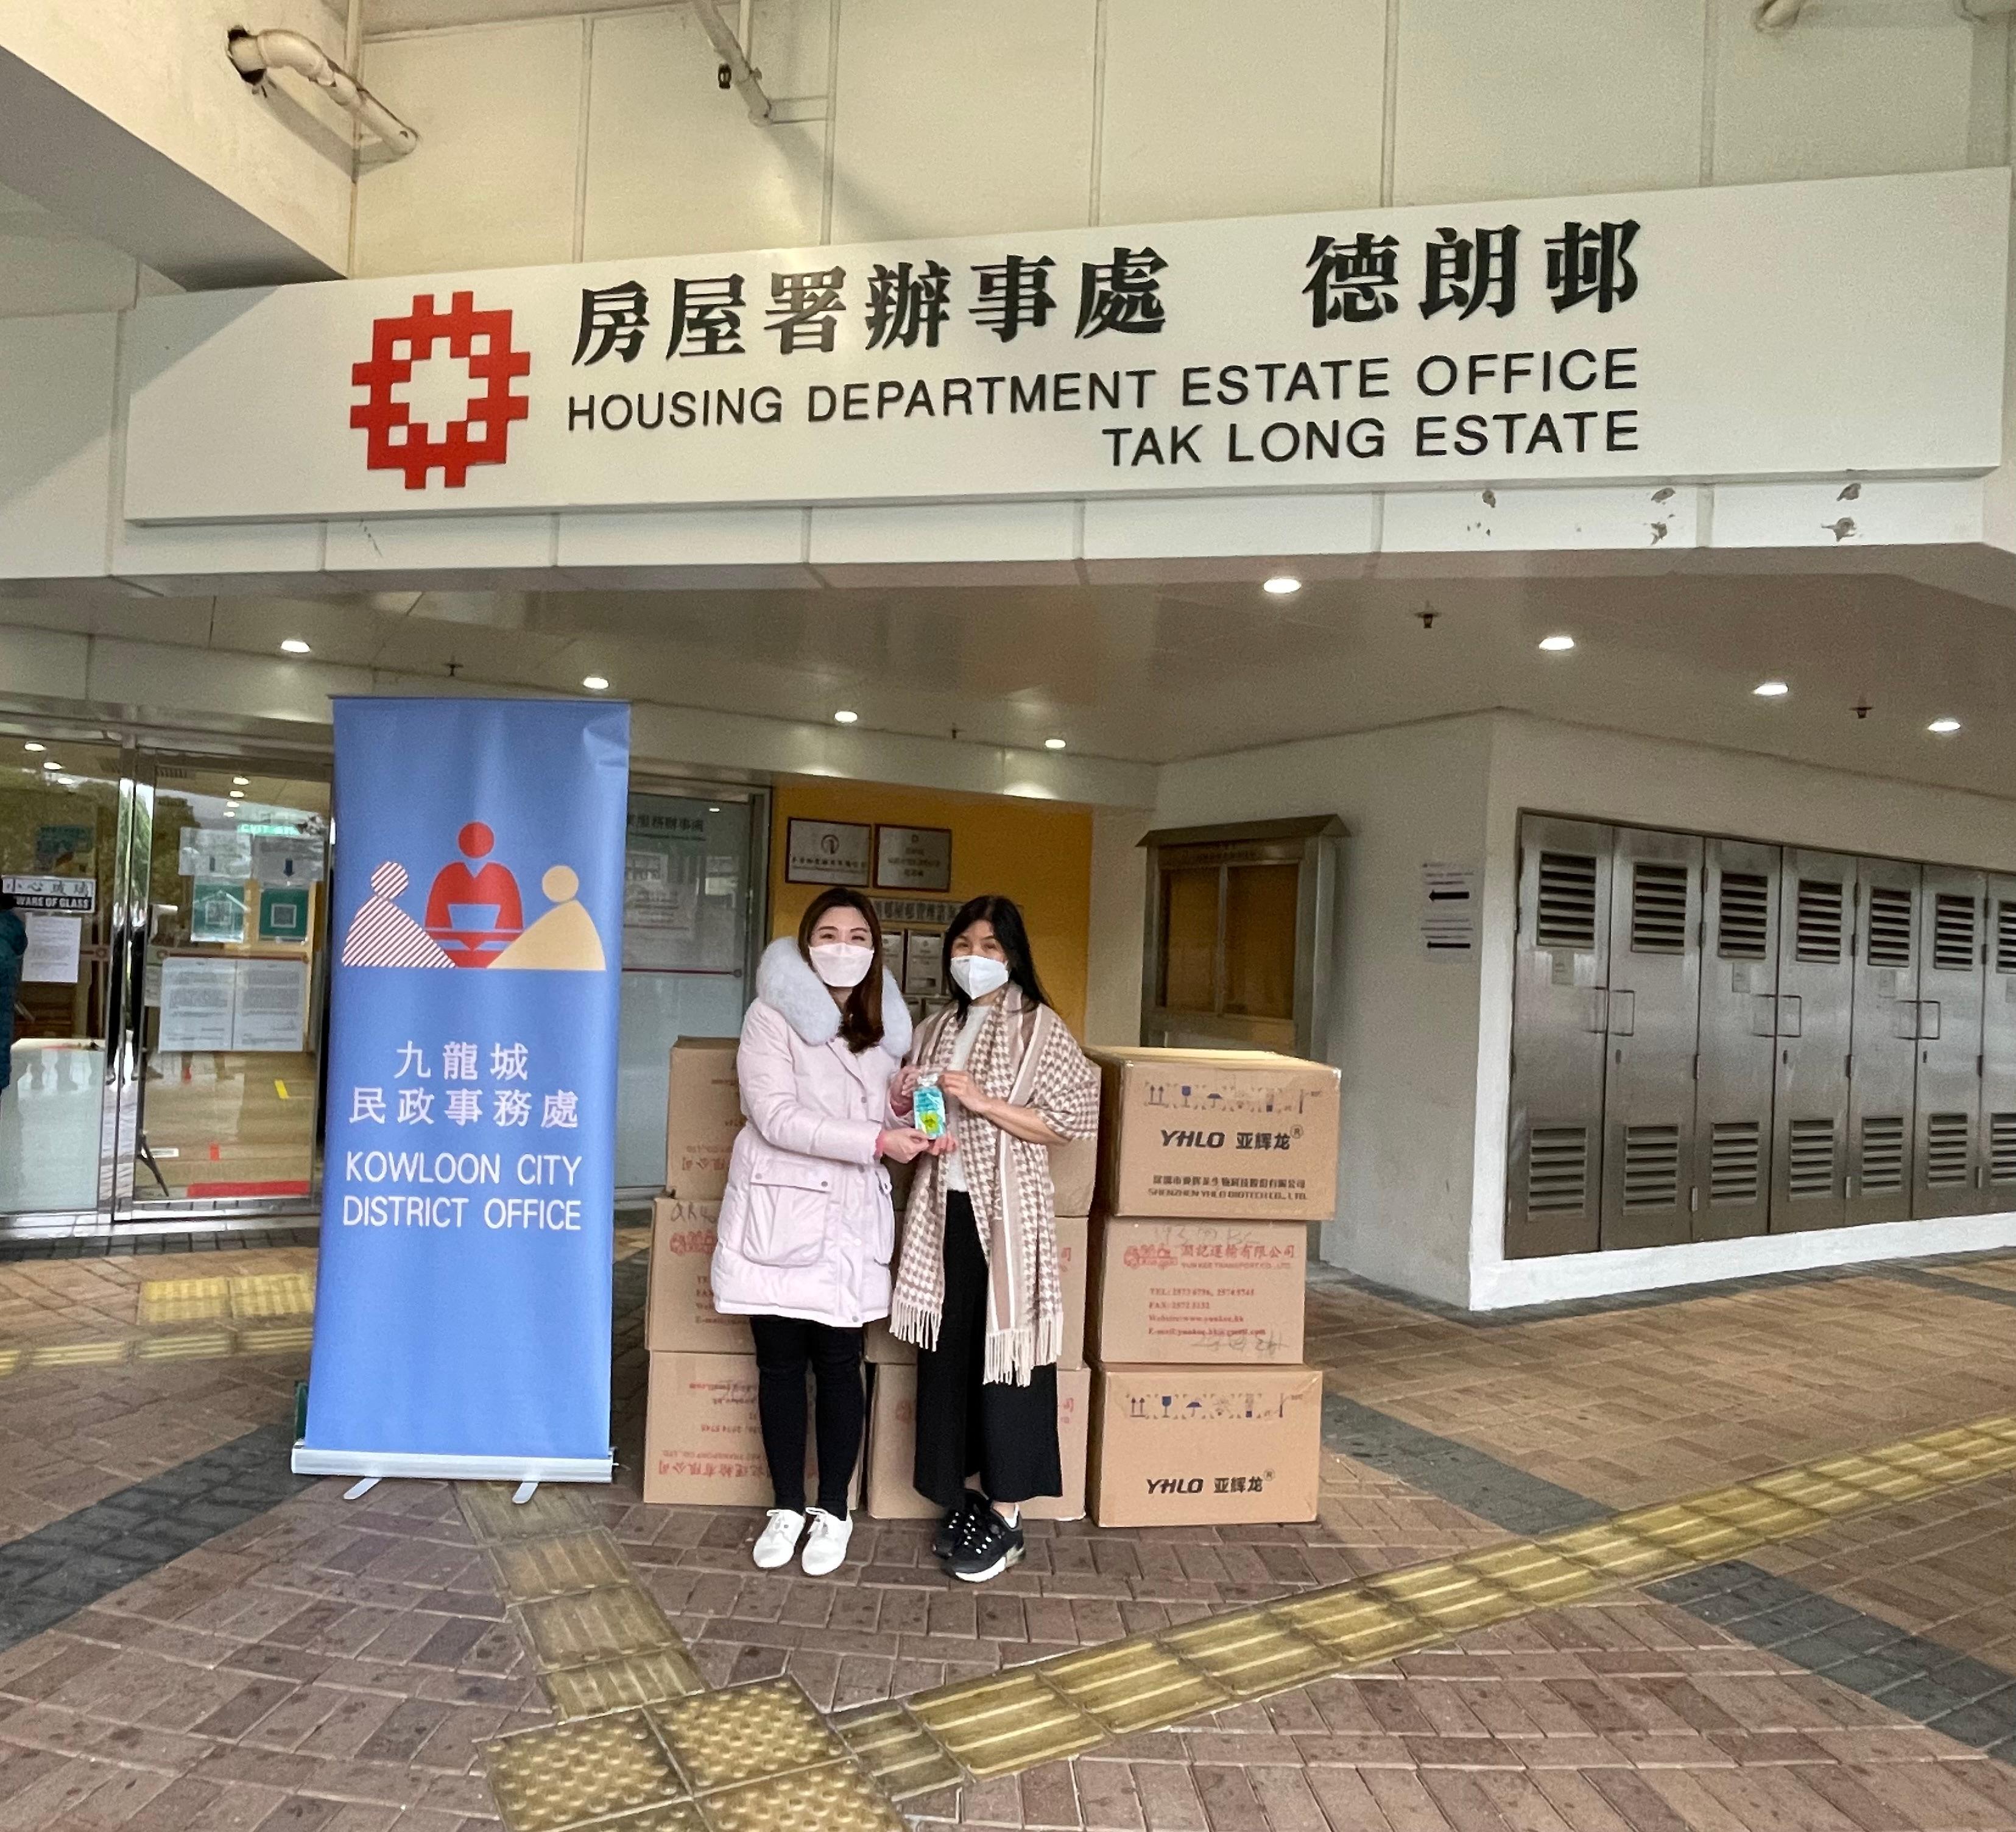 The Kowloon City District Office today (February 21) distributed rapid test kits to households, cleansing workers and property management staff living and working in Tak Long Estate for voluntary testing through the Estate's property management company.